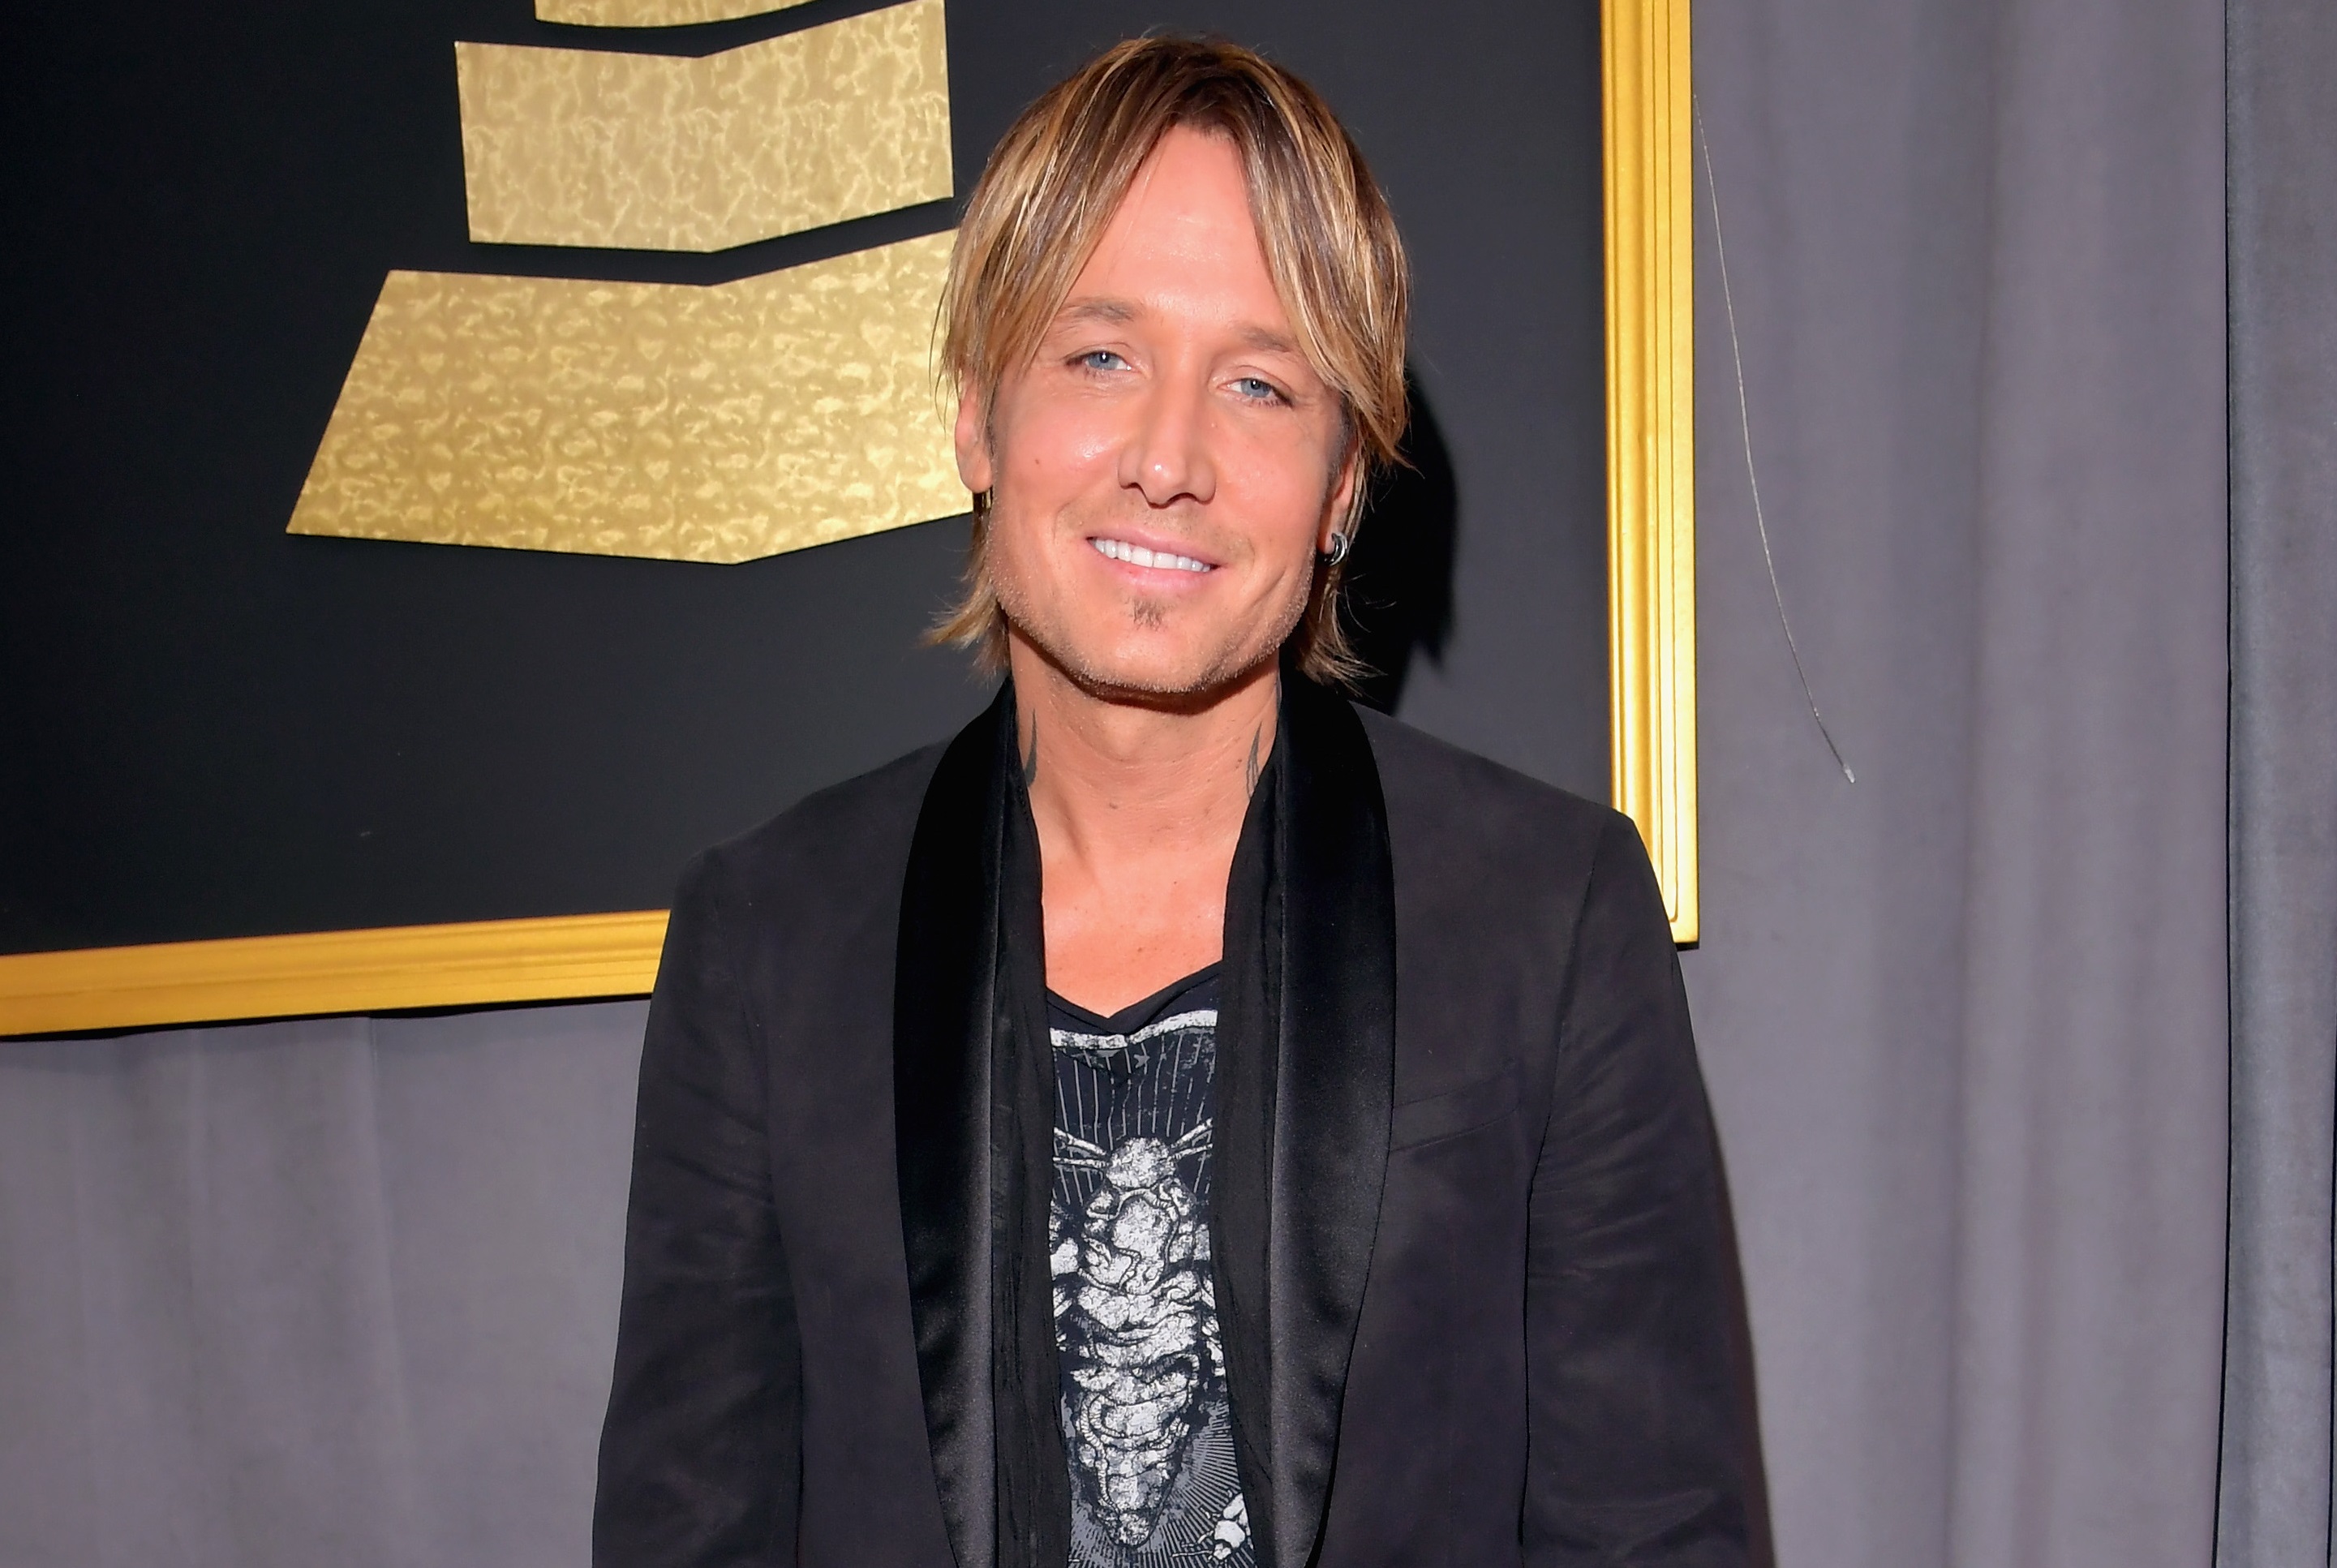 Keith Urban; Photo by Lester Cohen/WireImage